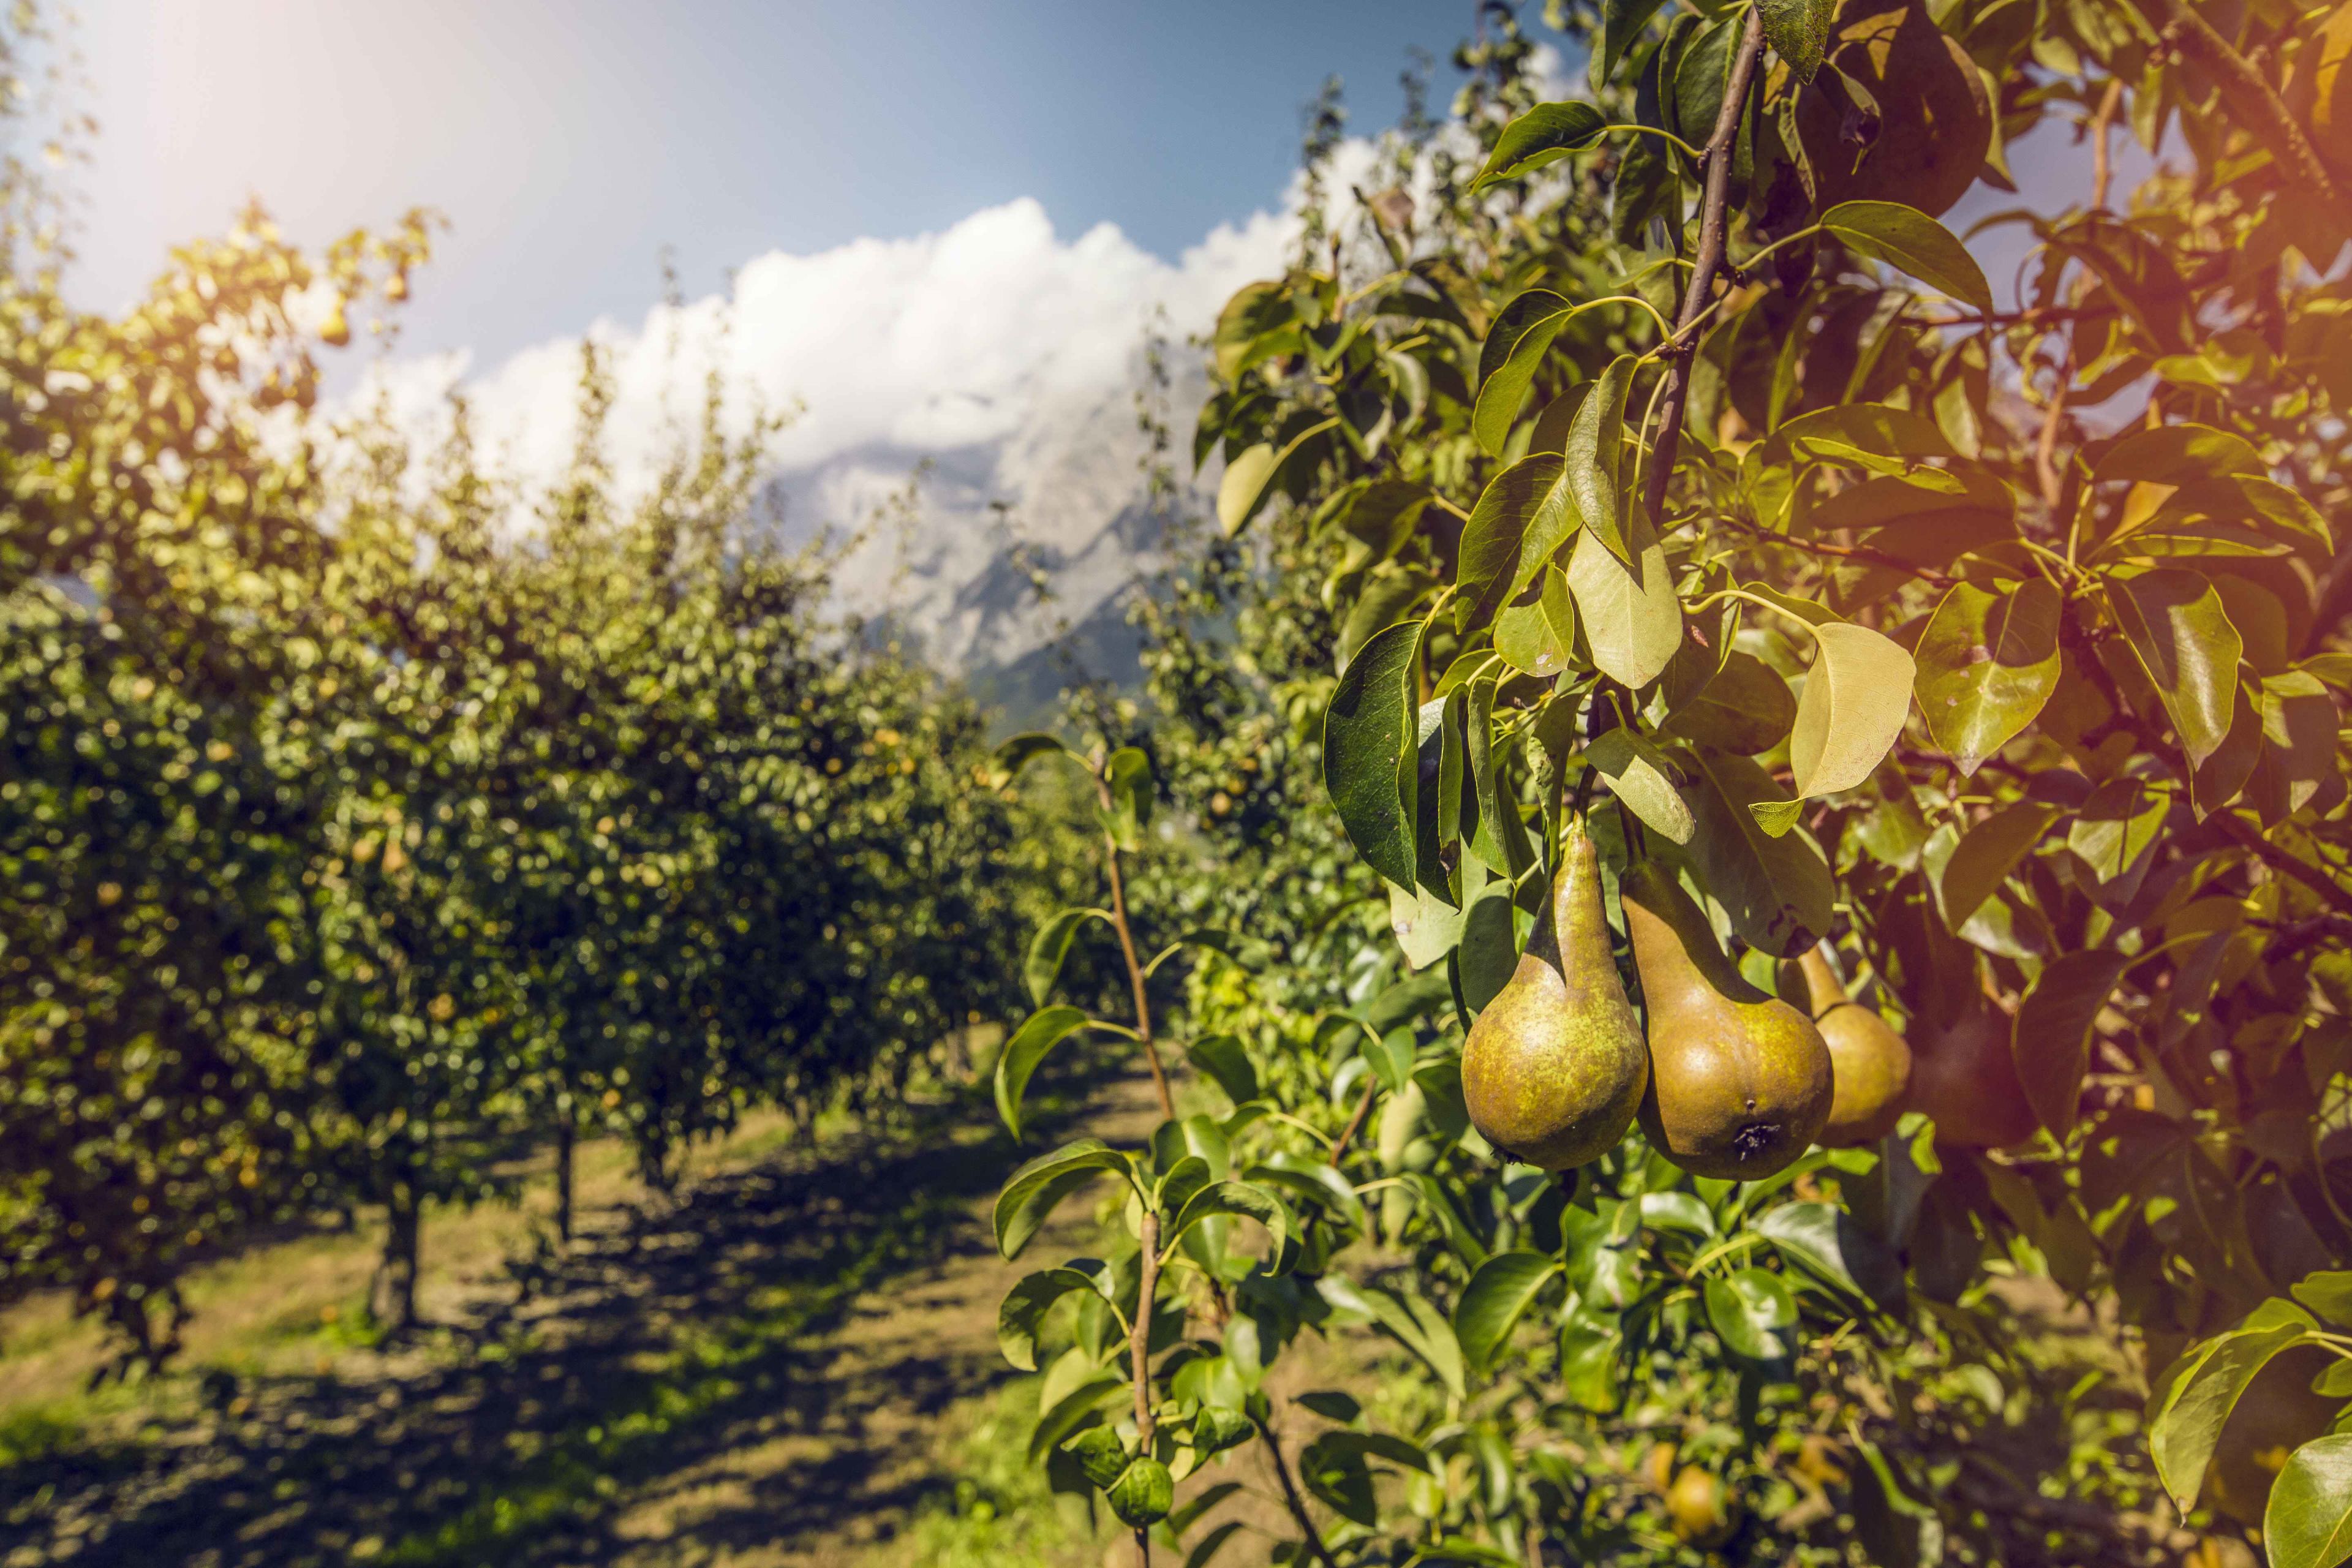 Pears in Valais orchards just before harvest, Valais Wallis, Schweiz Suisse